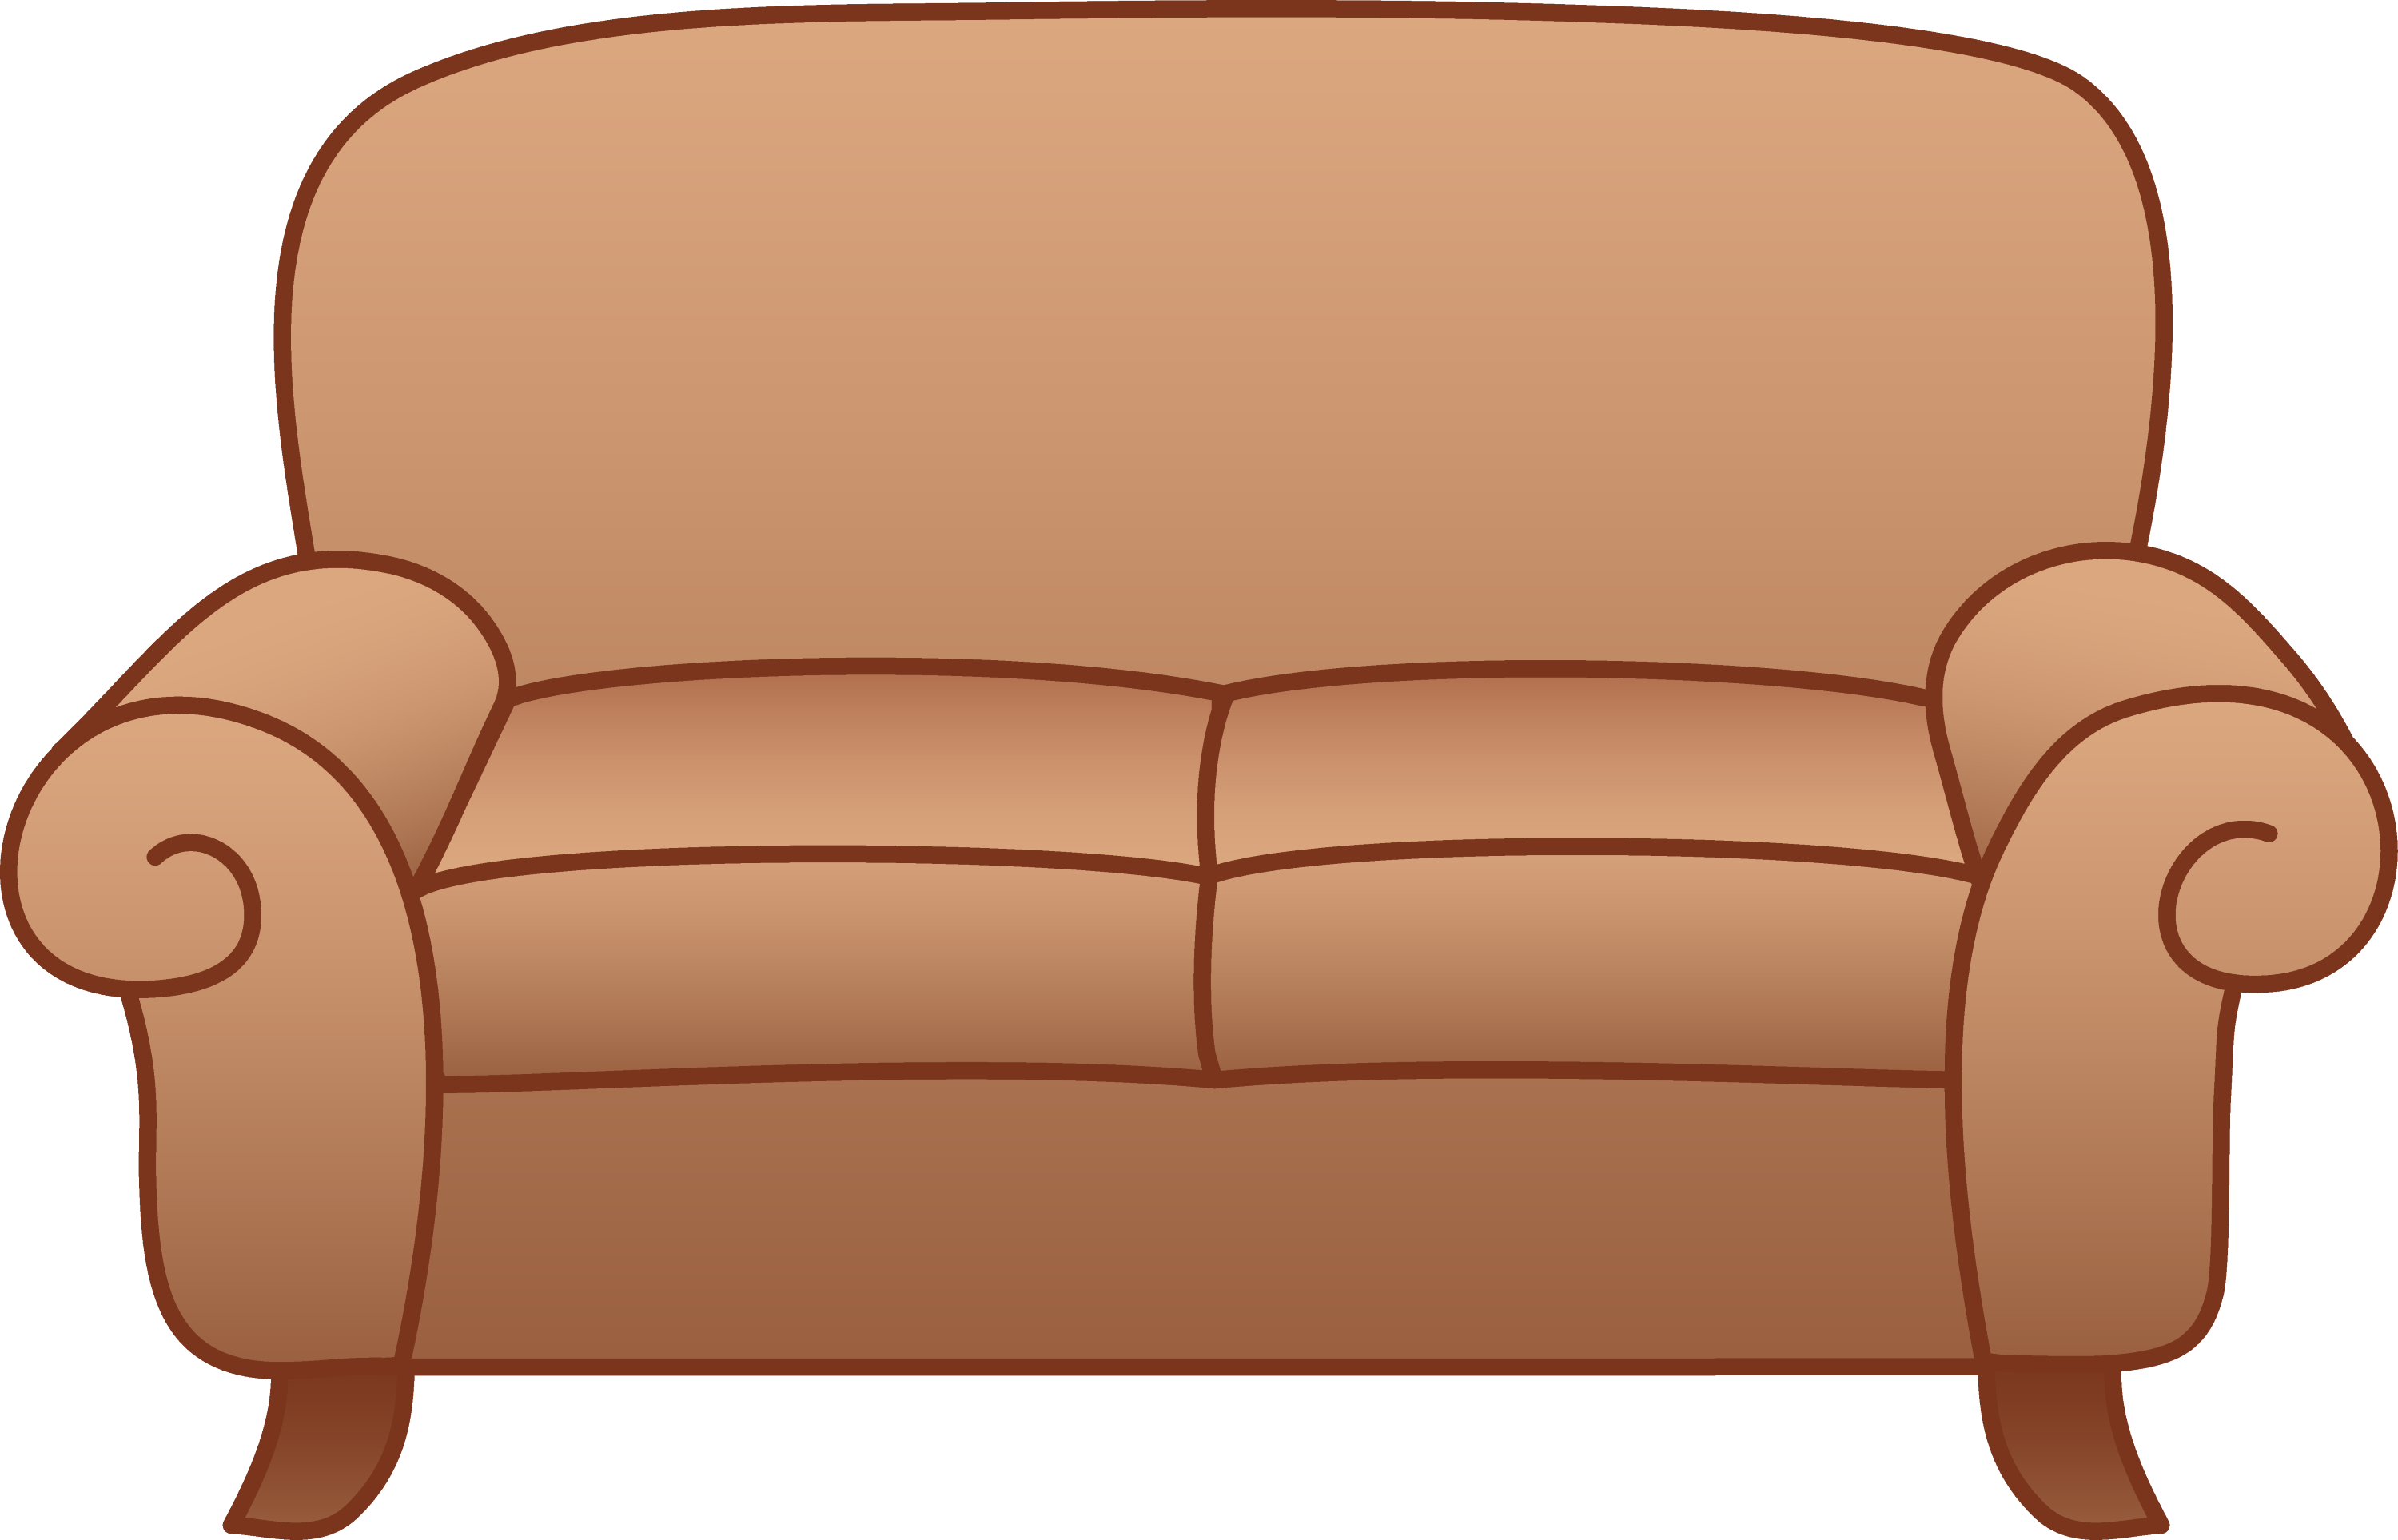 free clipart furniture pictures - photo #19